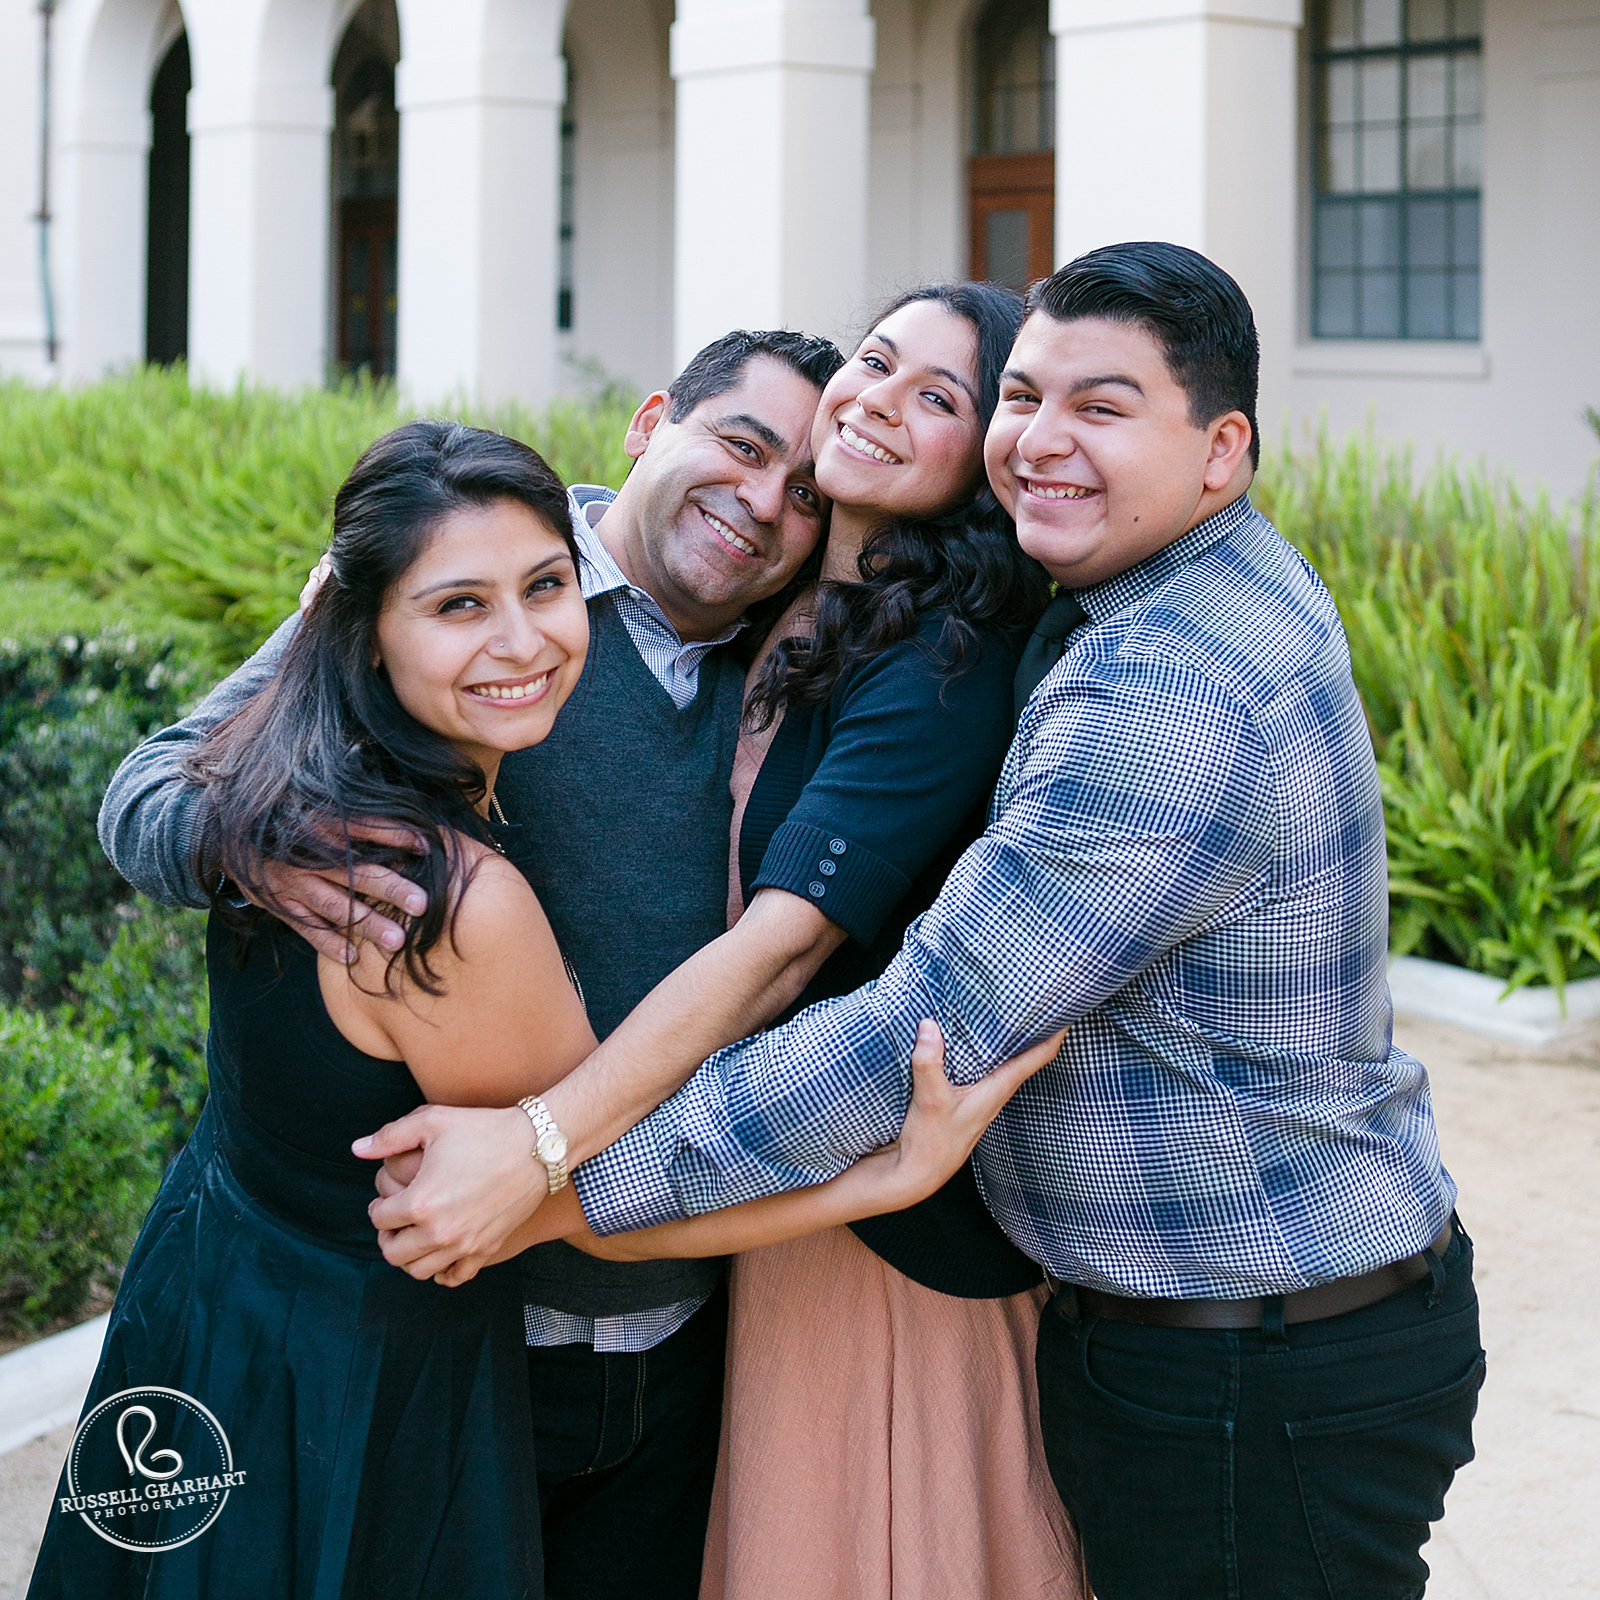 Pasadena City Hall Family Portrait Session – Russell Gearhart Photography – www.gearhartphoto.com